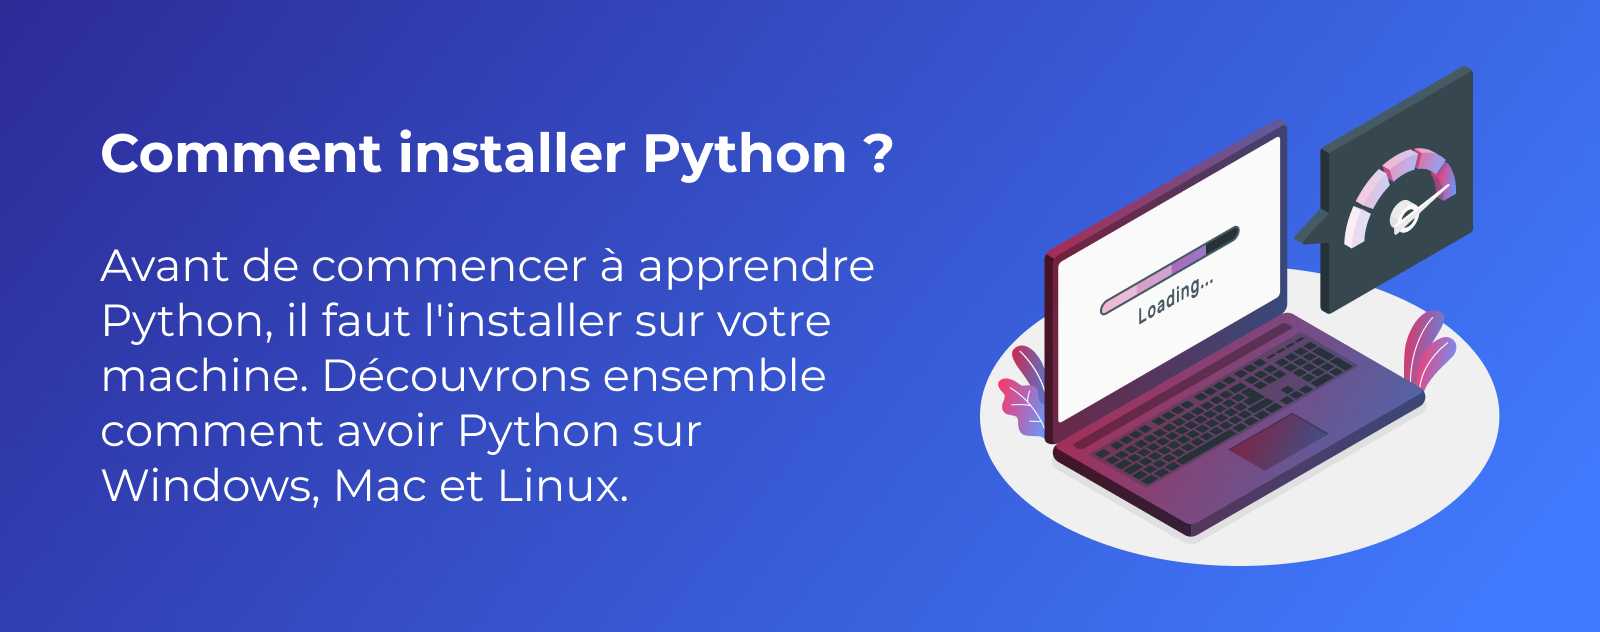 Comment installer Python ? Windows, mac, Linux, Android, iOS